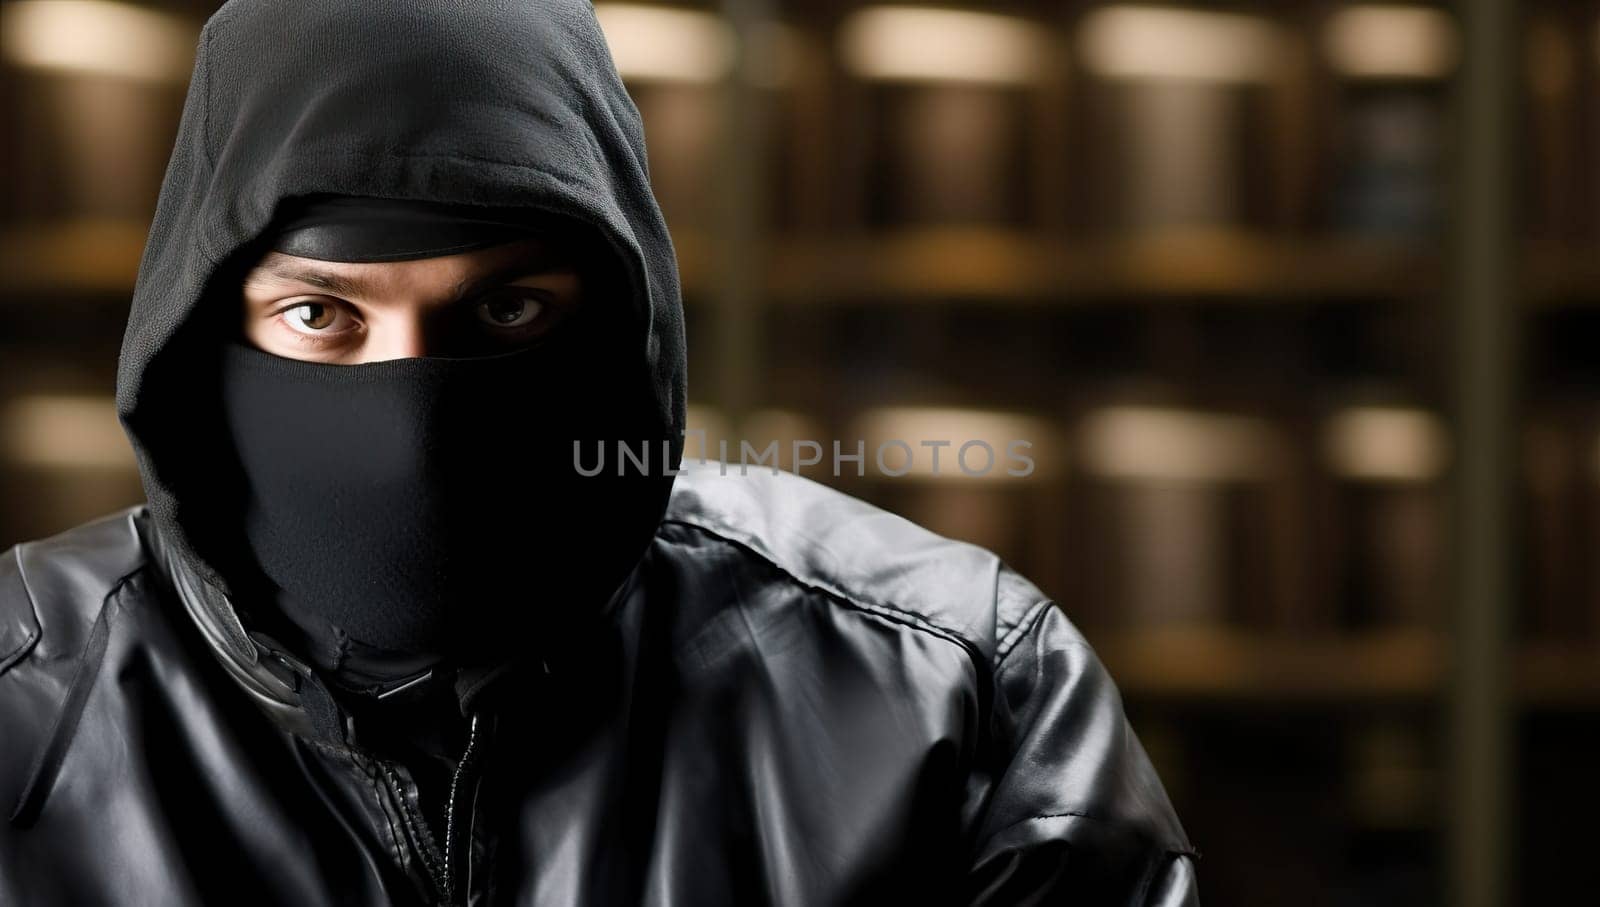 Masked man in a leather jacket and balaclava